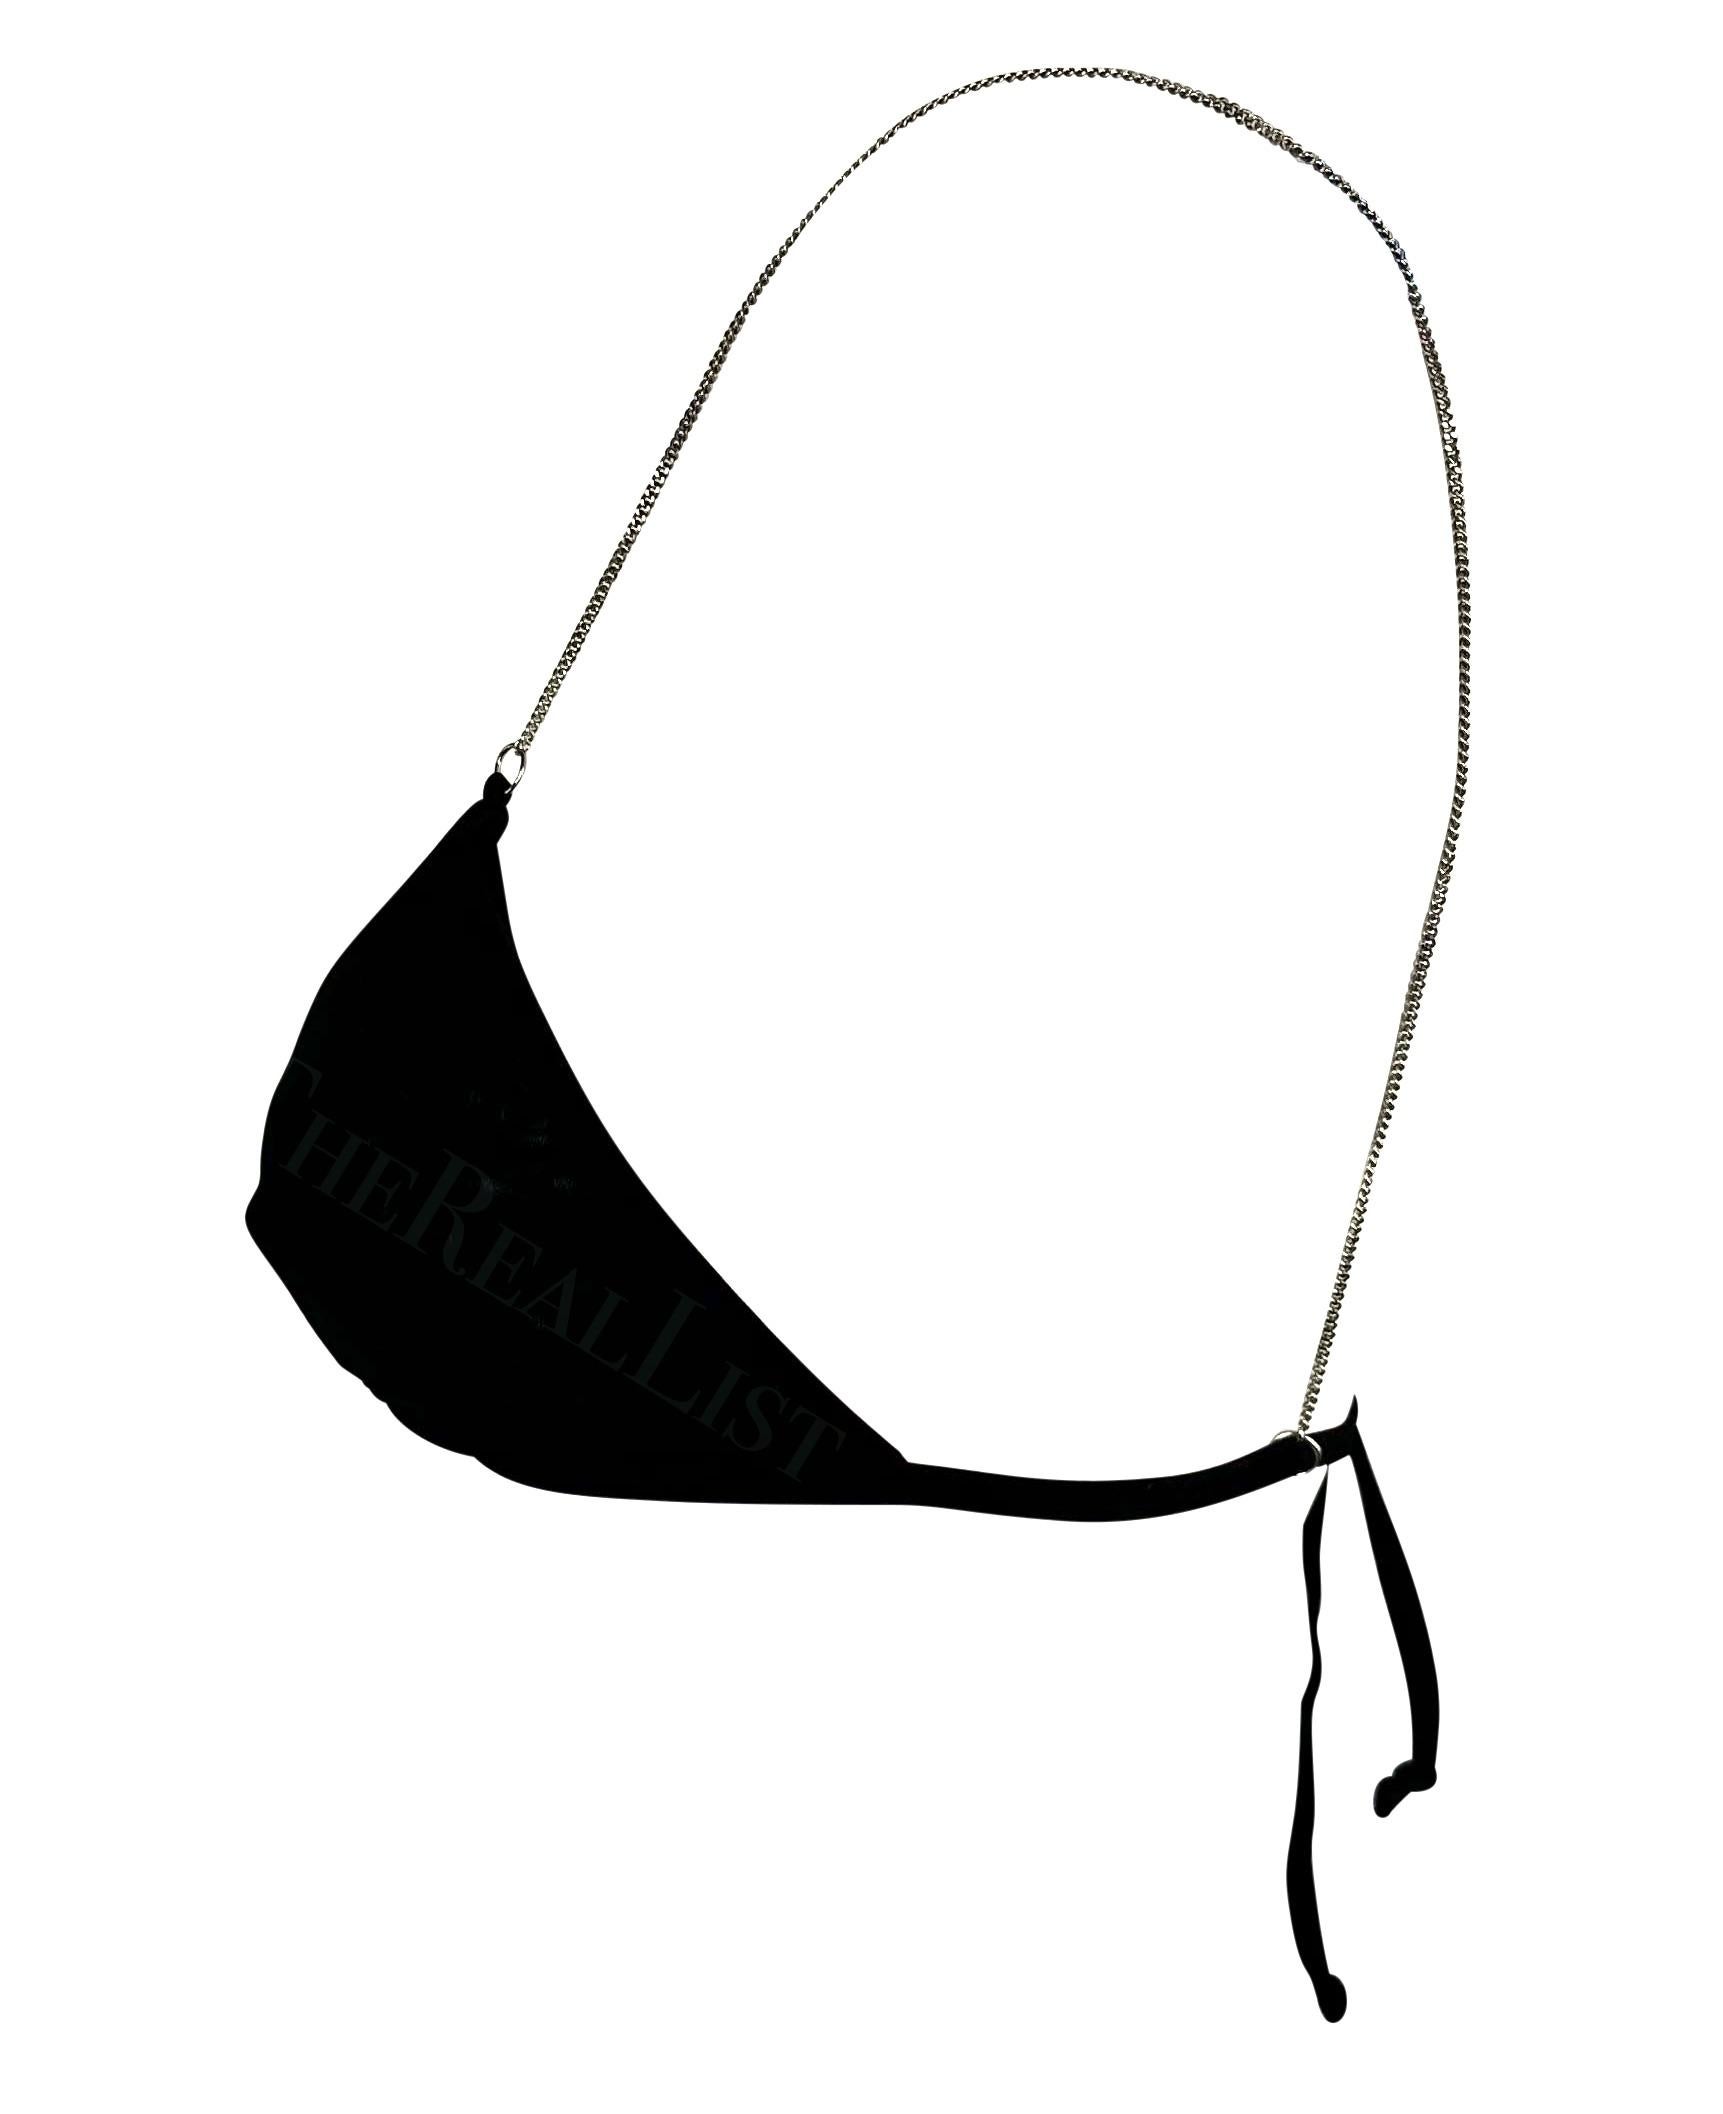 Presenting a fabulous black mesh Dolce and Gabbana bralette. From the early 2000s, this bikini top of sheer black mesh and is made complete with silver-tone chain straps. Worn as a part of an ensemble or bikini, this ultra-sexy Dolce and Gabbana